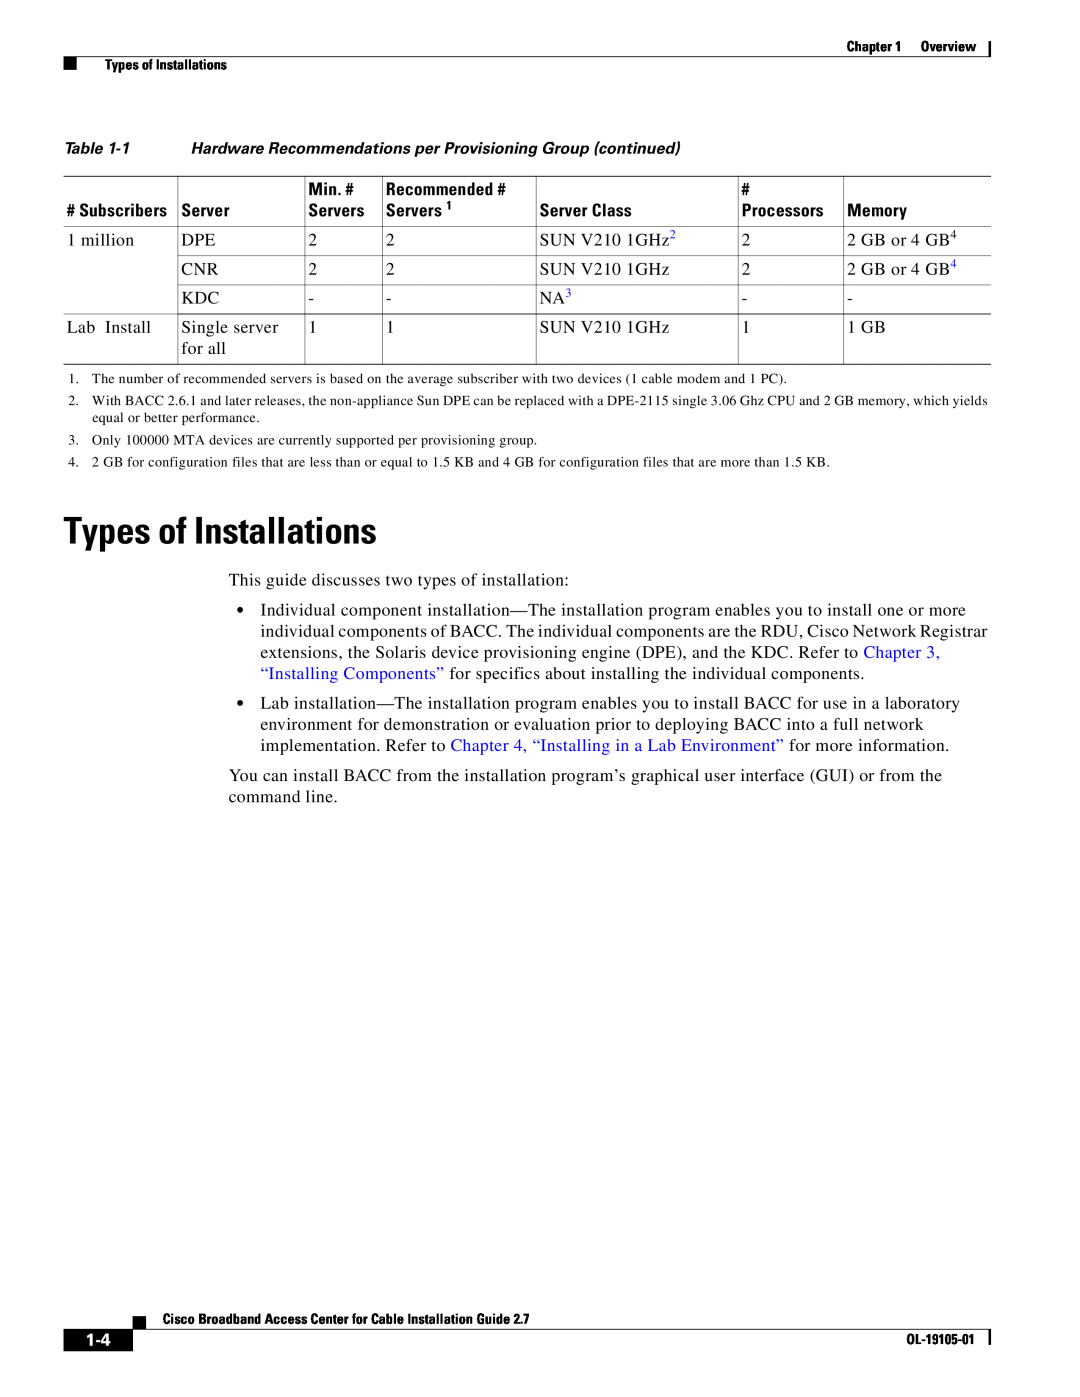 Cisco Systems Broadband Access Center Types of Installations, Recommended #, Min. #, Servers, Server Class, Processors 